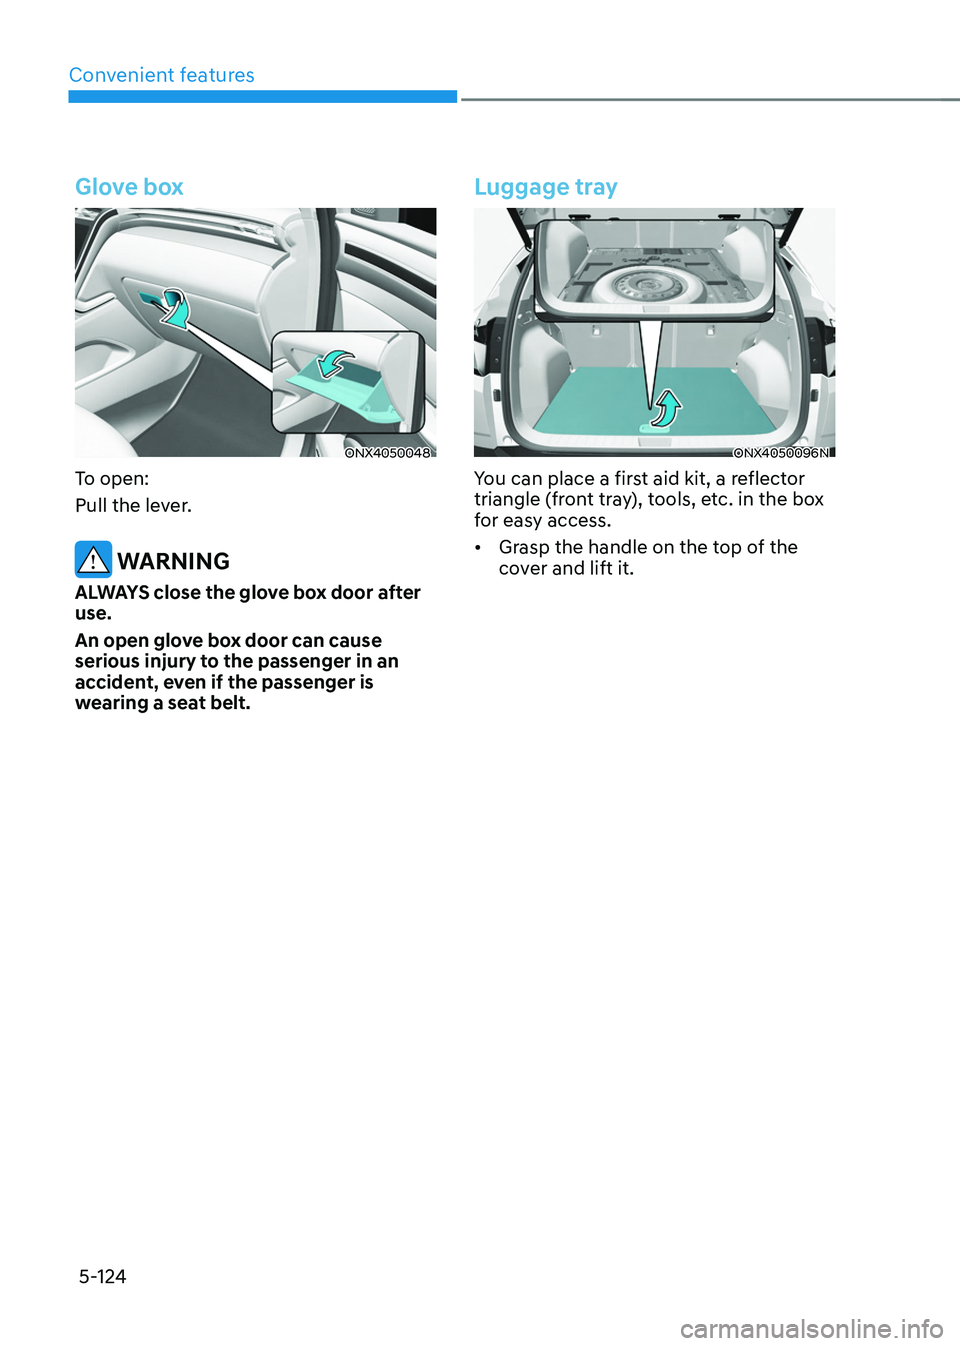 HYUNDAI TUCSON 2022 Service Manual Convenient features
5-124
Glove box
ONX4050048
To open:
Pull the lever.
 WARNING
ALWAYS close the glove box door after 
use.
An open glove box door can cause 
serious injury to the passenger in an 
ac